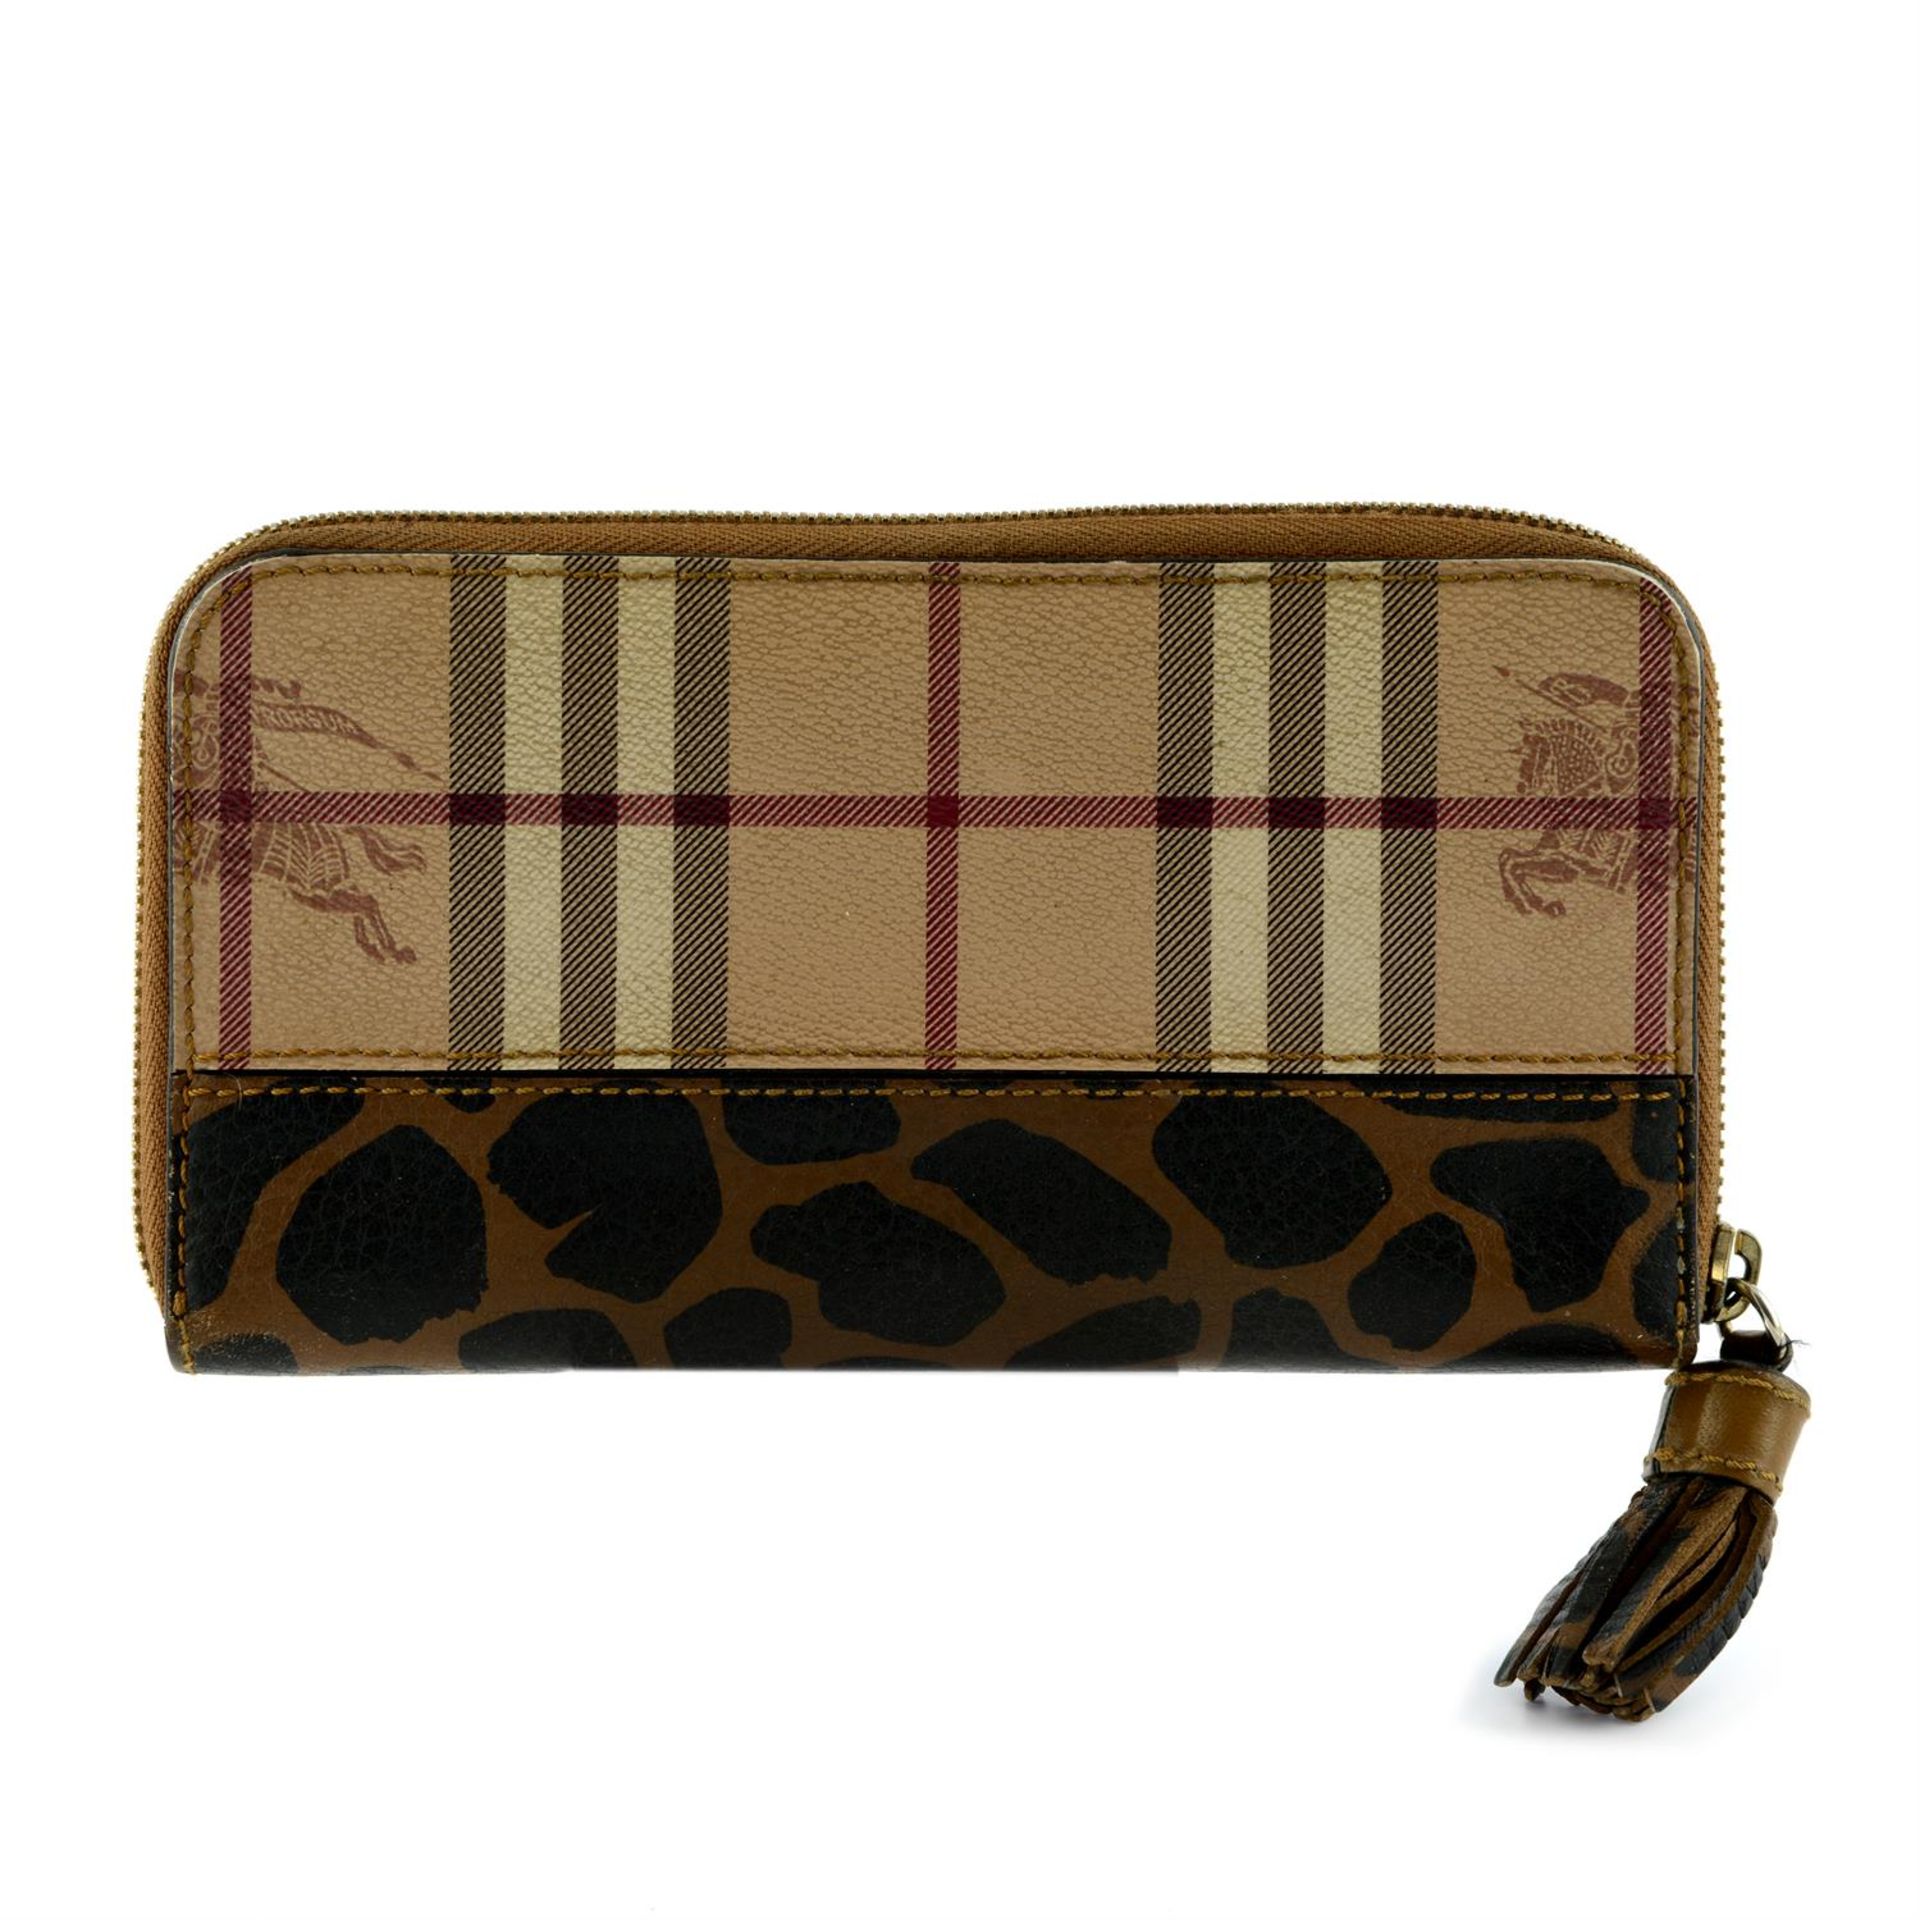 BURBERRY - A Horseferry check and leopard print leather zippy wallet. - Image 2 of 3